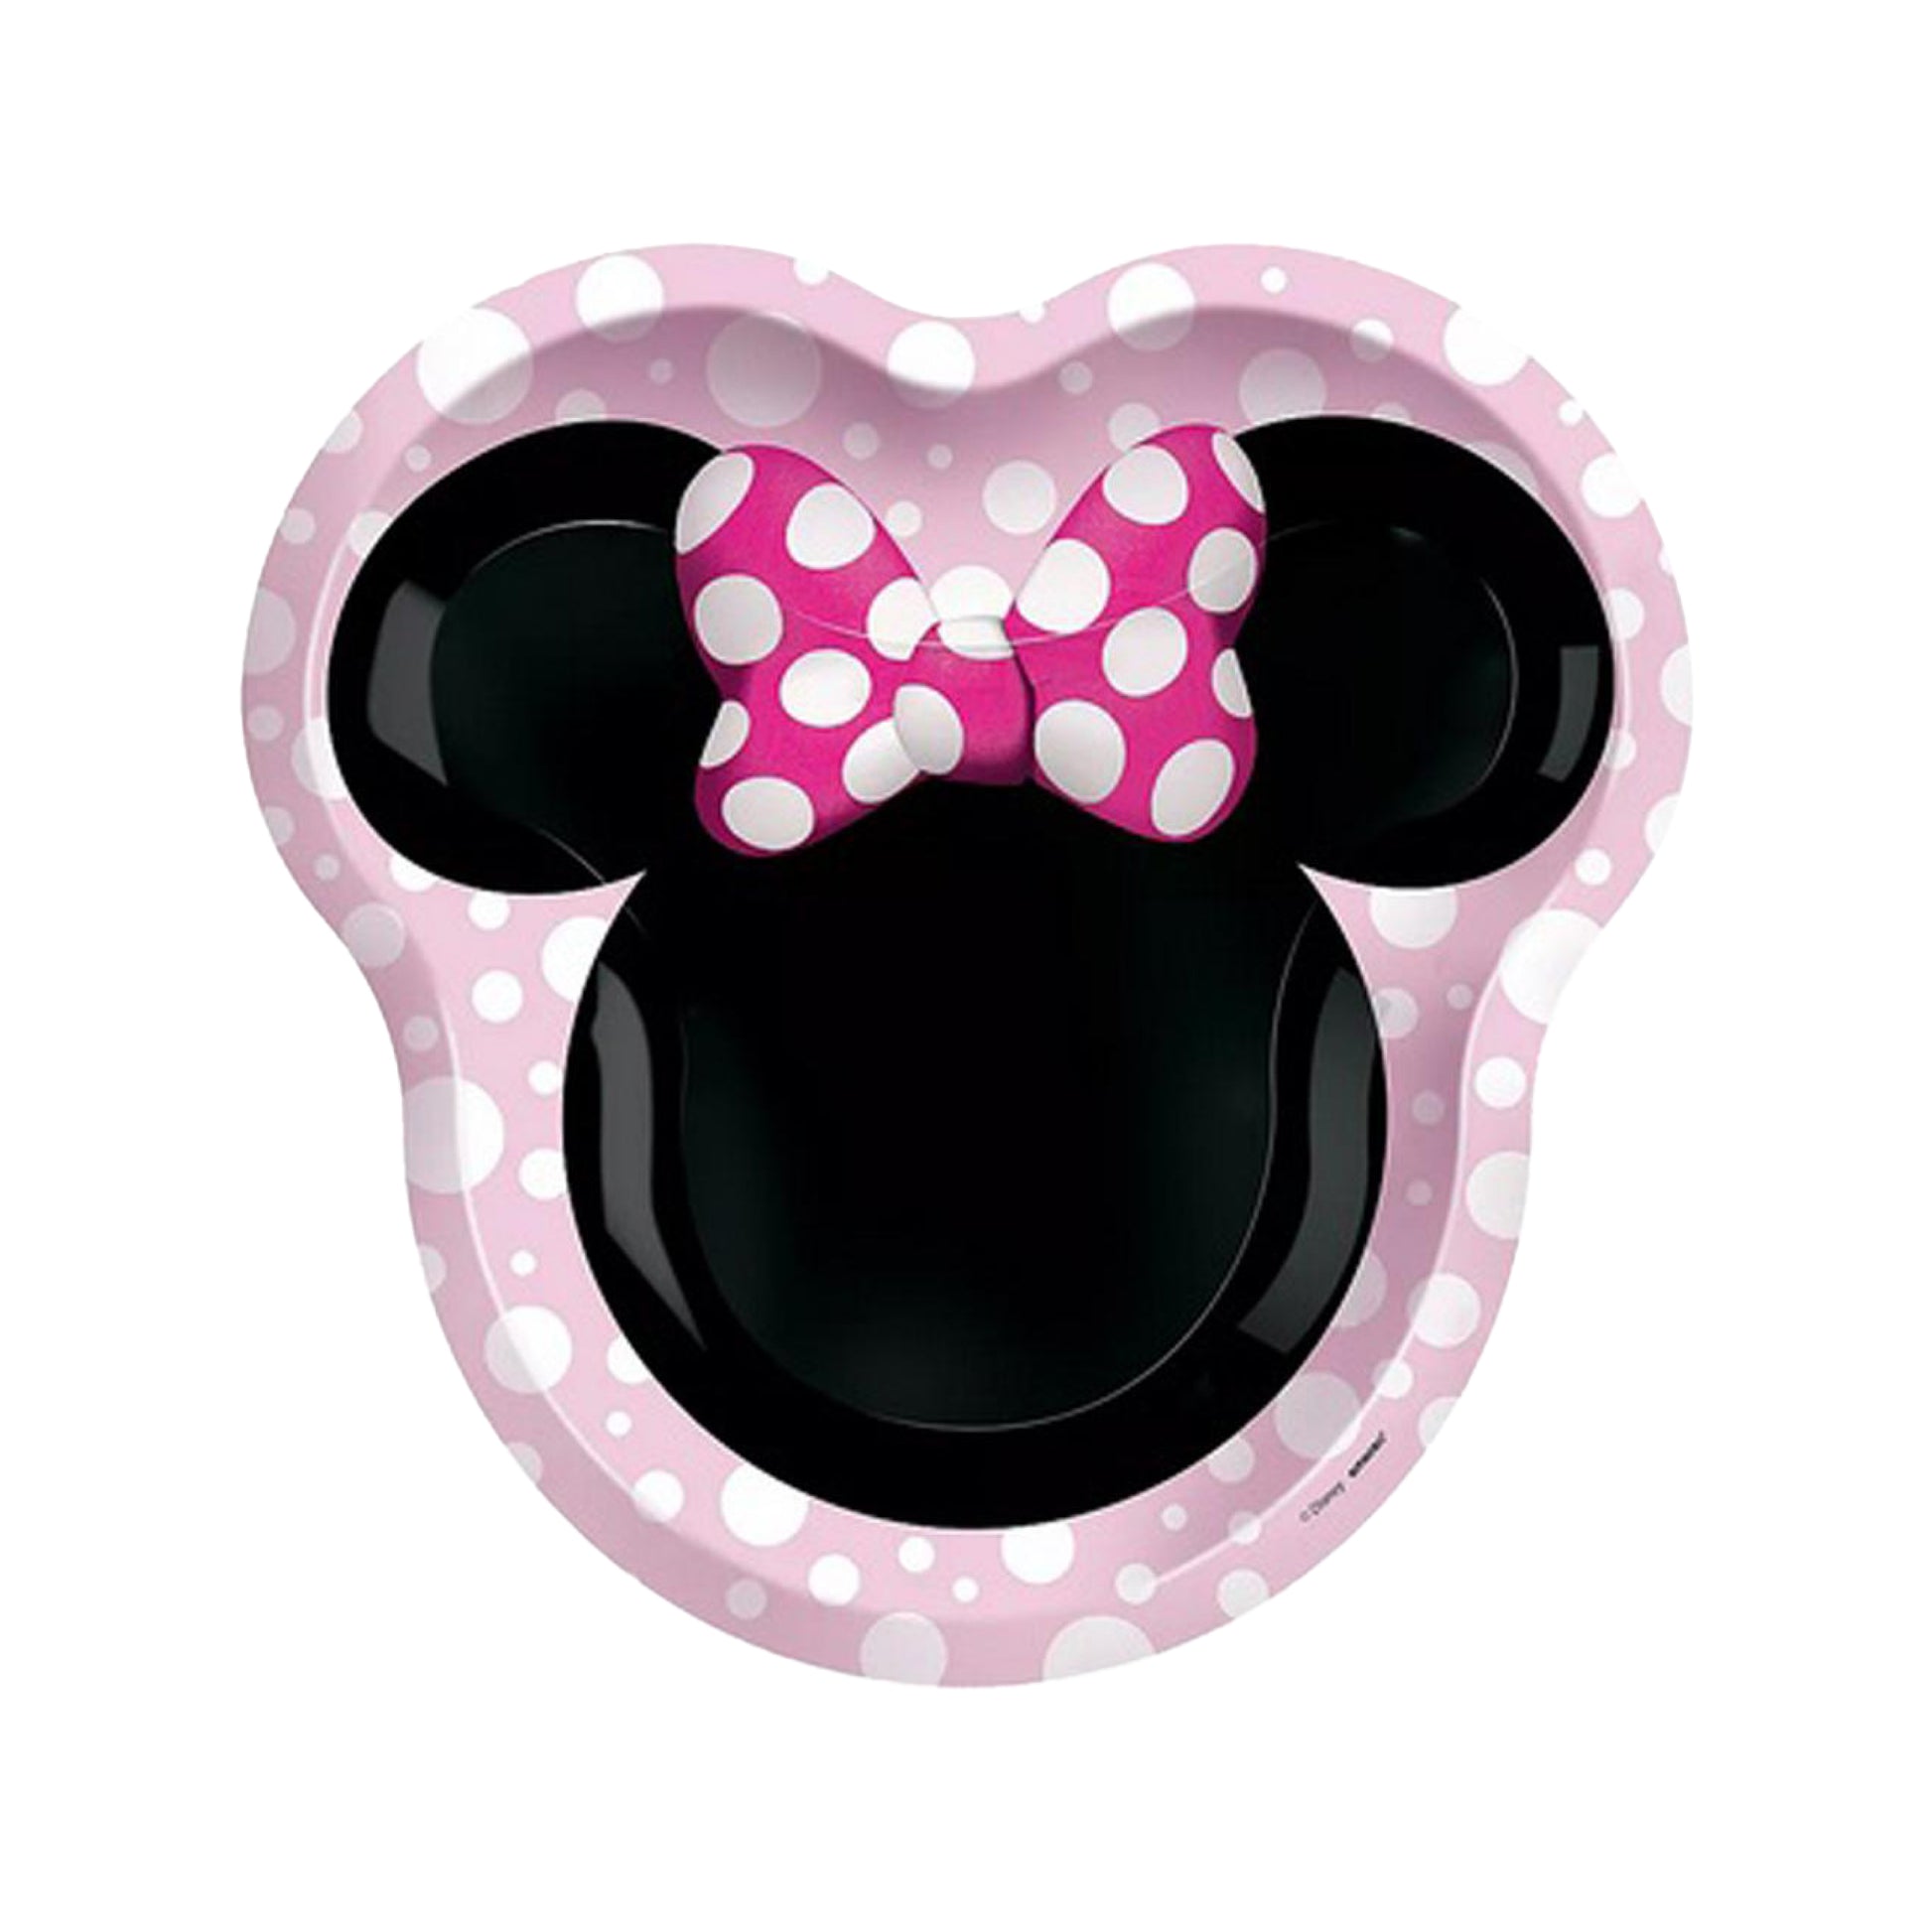 26 cm Minnie Mouse Head Paper Plates Pack of 8